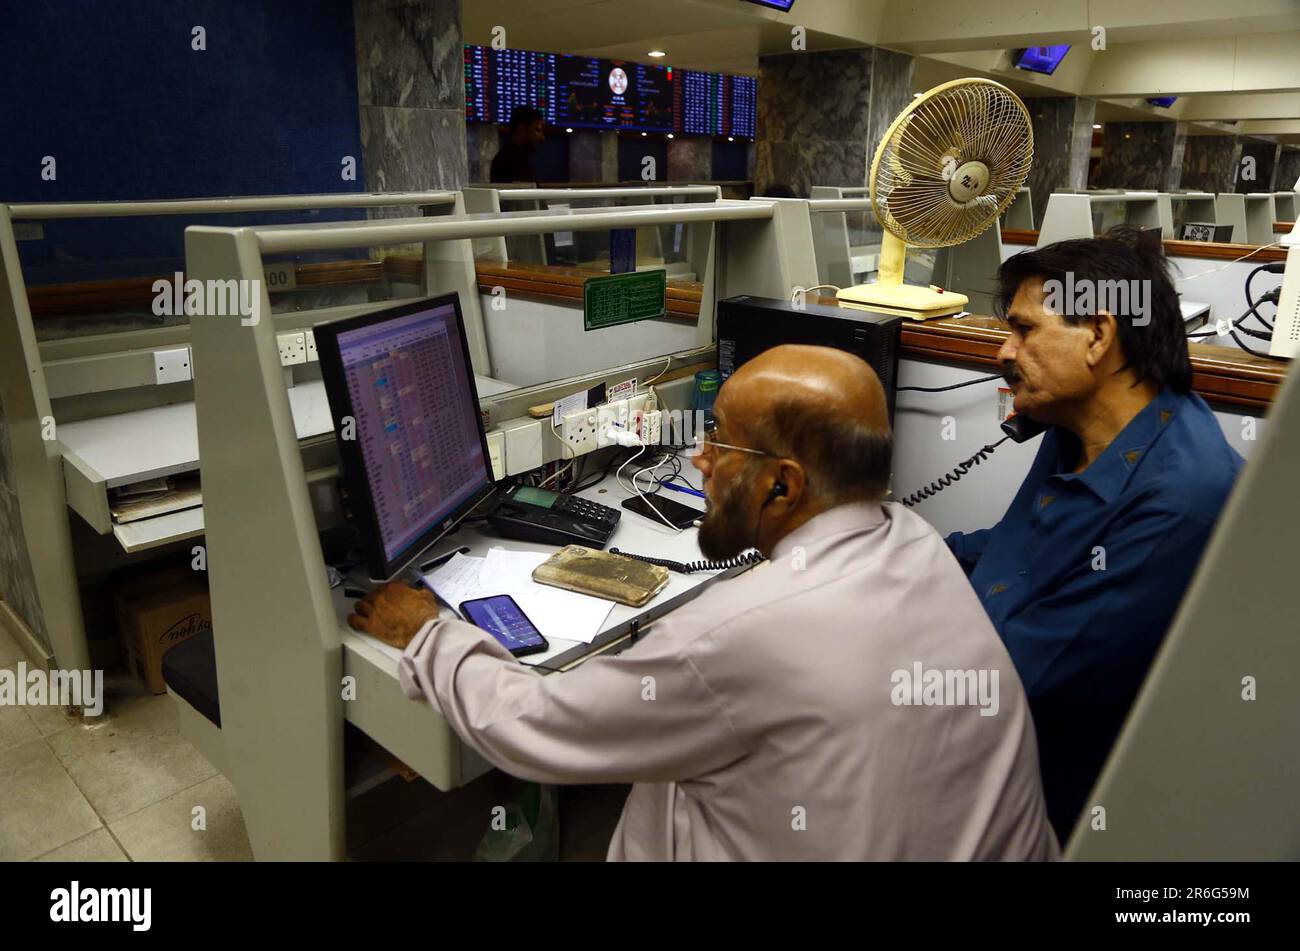 Brokers are busy in trading at Pakistan Stock Exchange (PSX) in Karachi on Friday, June 9, 2023. The Pakistan Stock Exchange (PSX) concluded the week on a positive and optimistic note, with a notable gain of 217.74 points. Investors eagerly anticipated positive outcomes from the upcoming budget, leading to a strong and promising session. Credit: Asianet-Pakistan/Alamy Live News Stock Photo